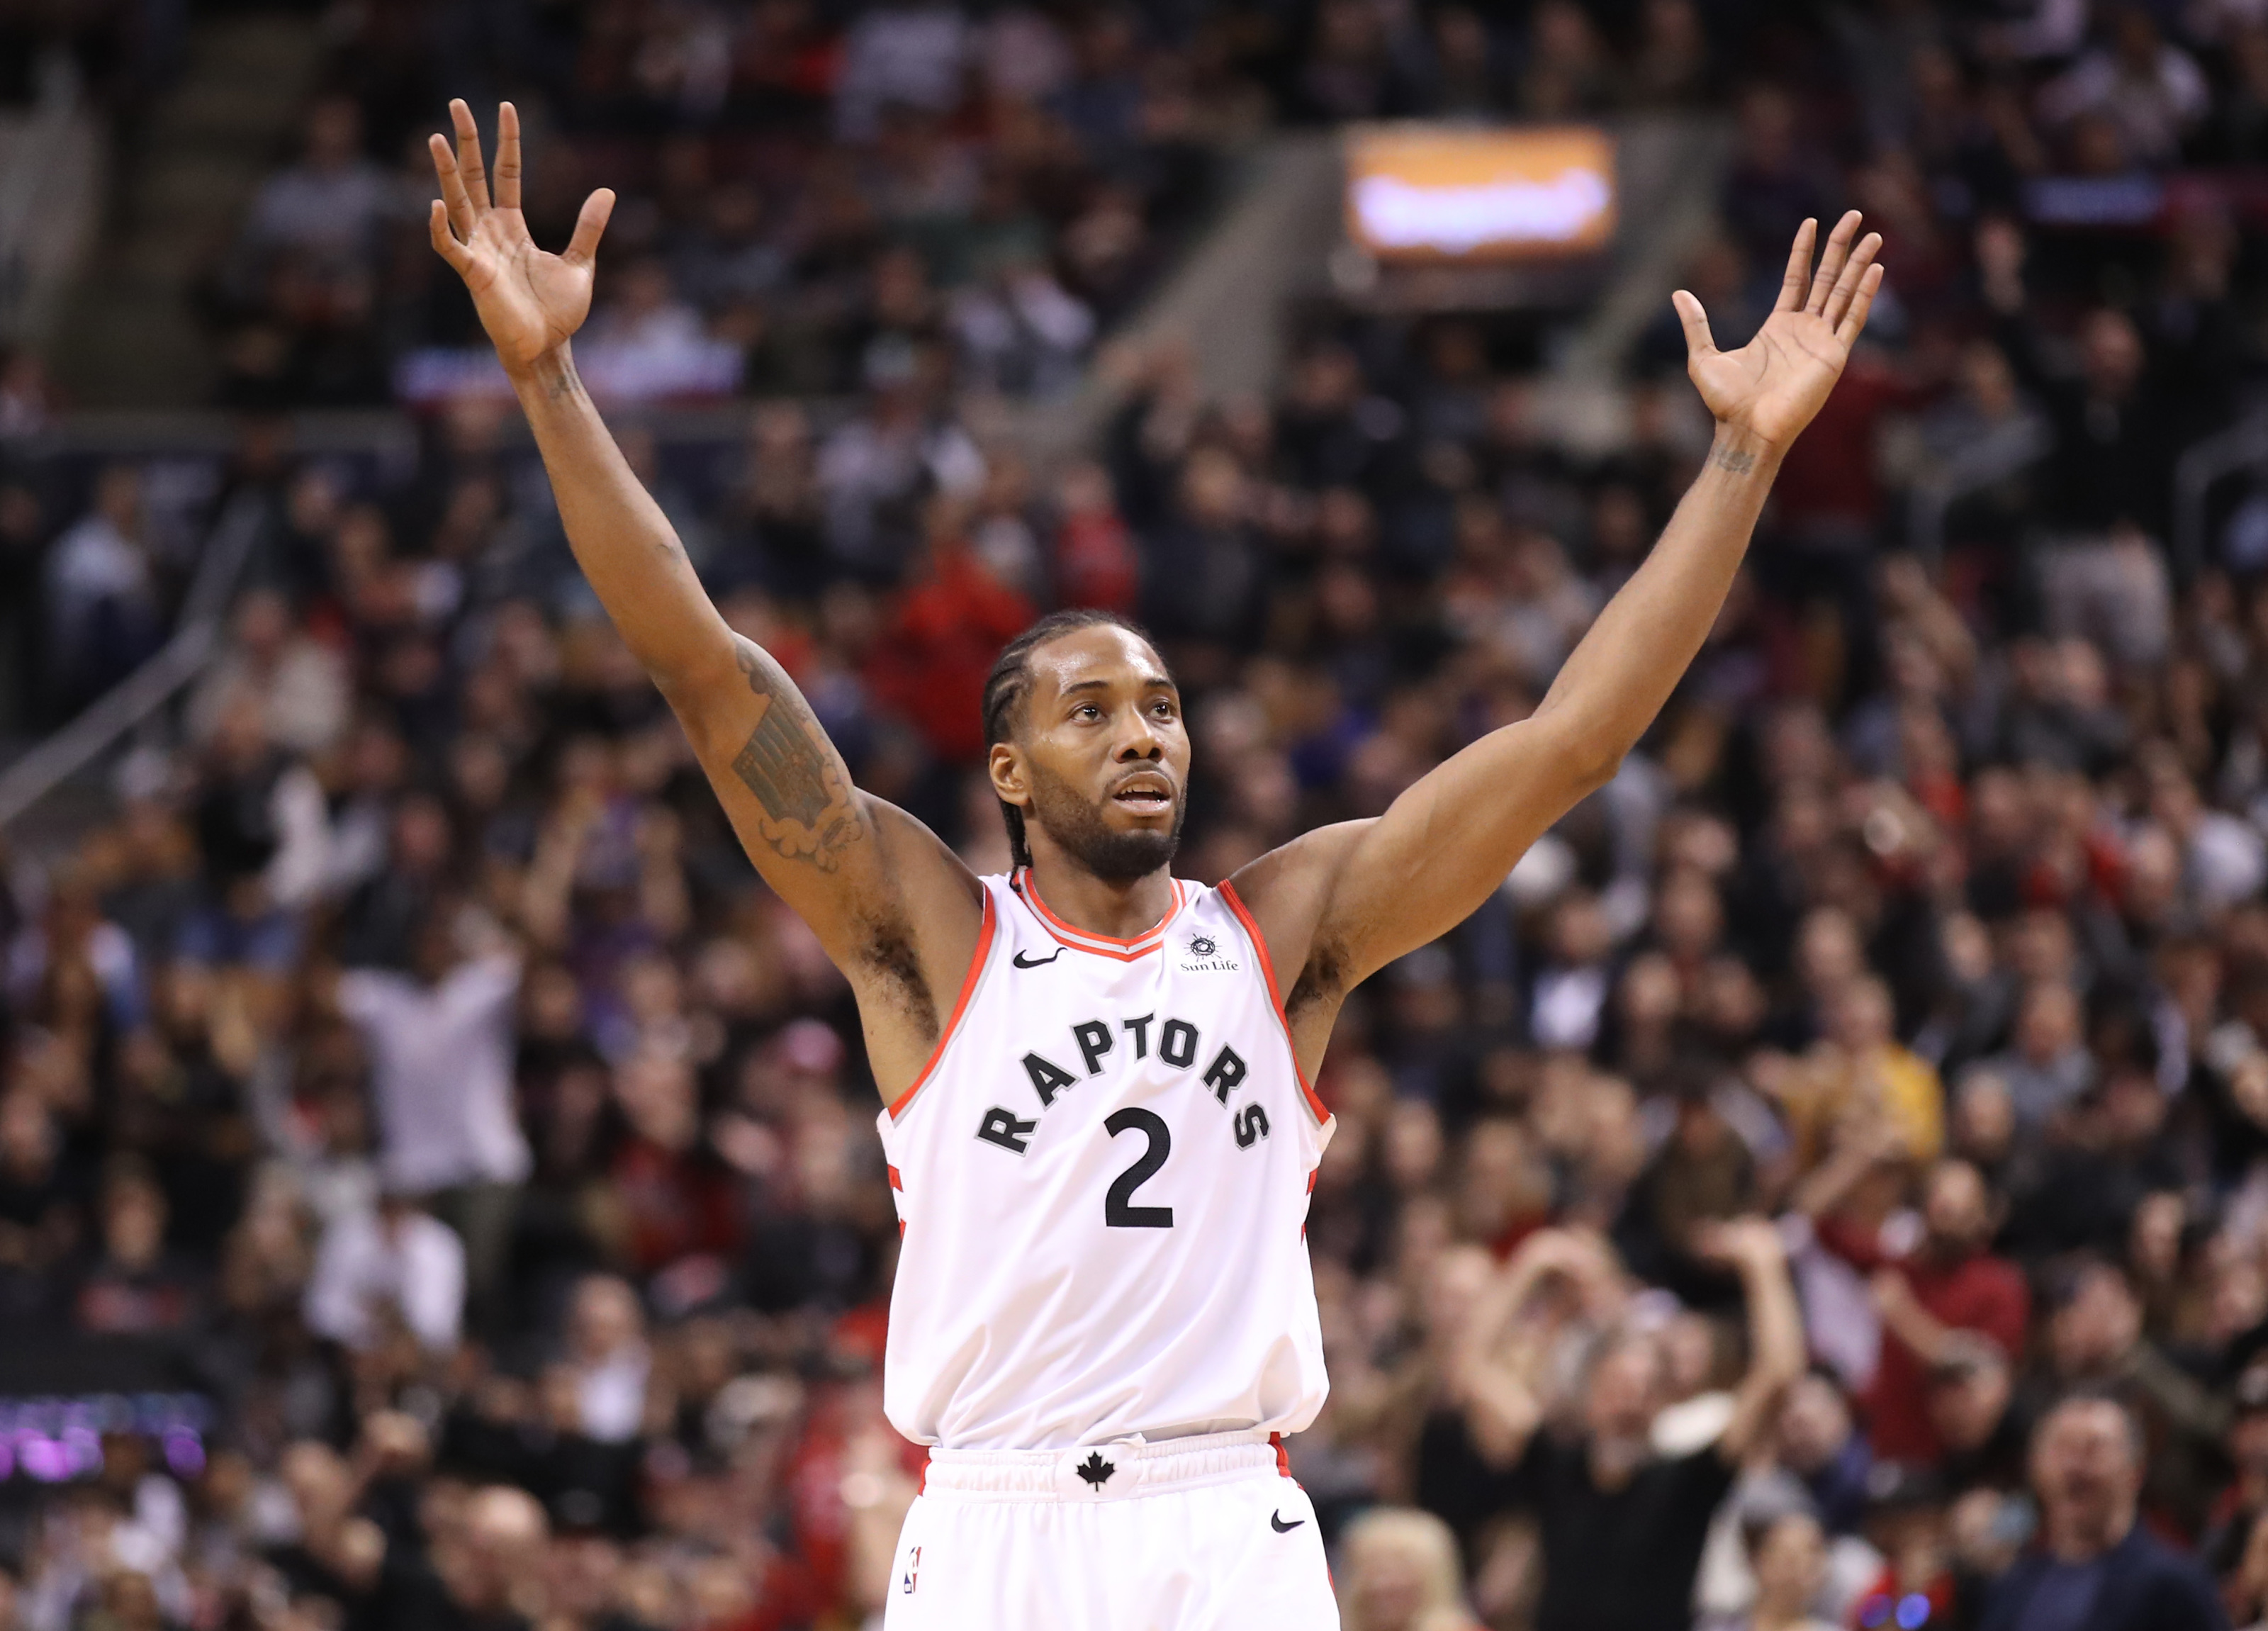 Jersey retirement unlikely: Raptors hand out Kawhi's No. 2 once